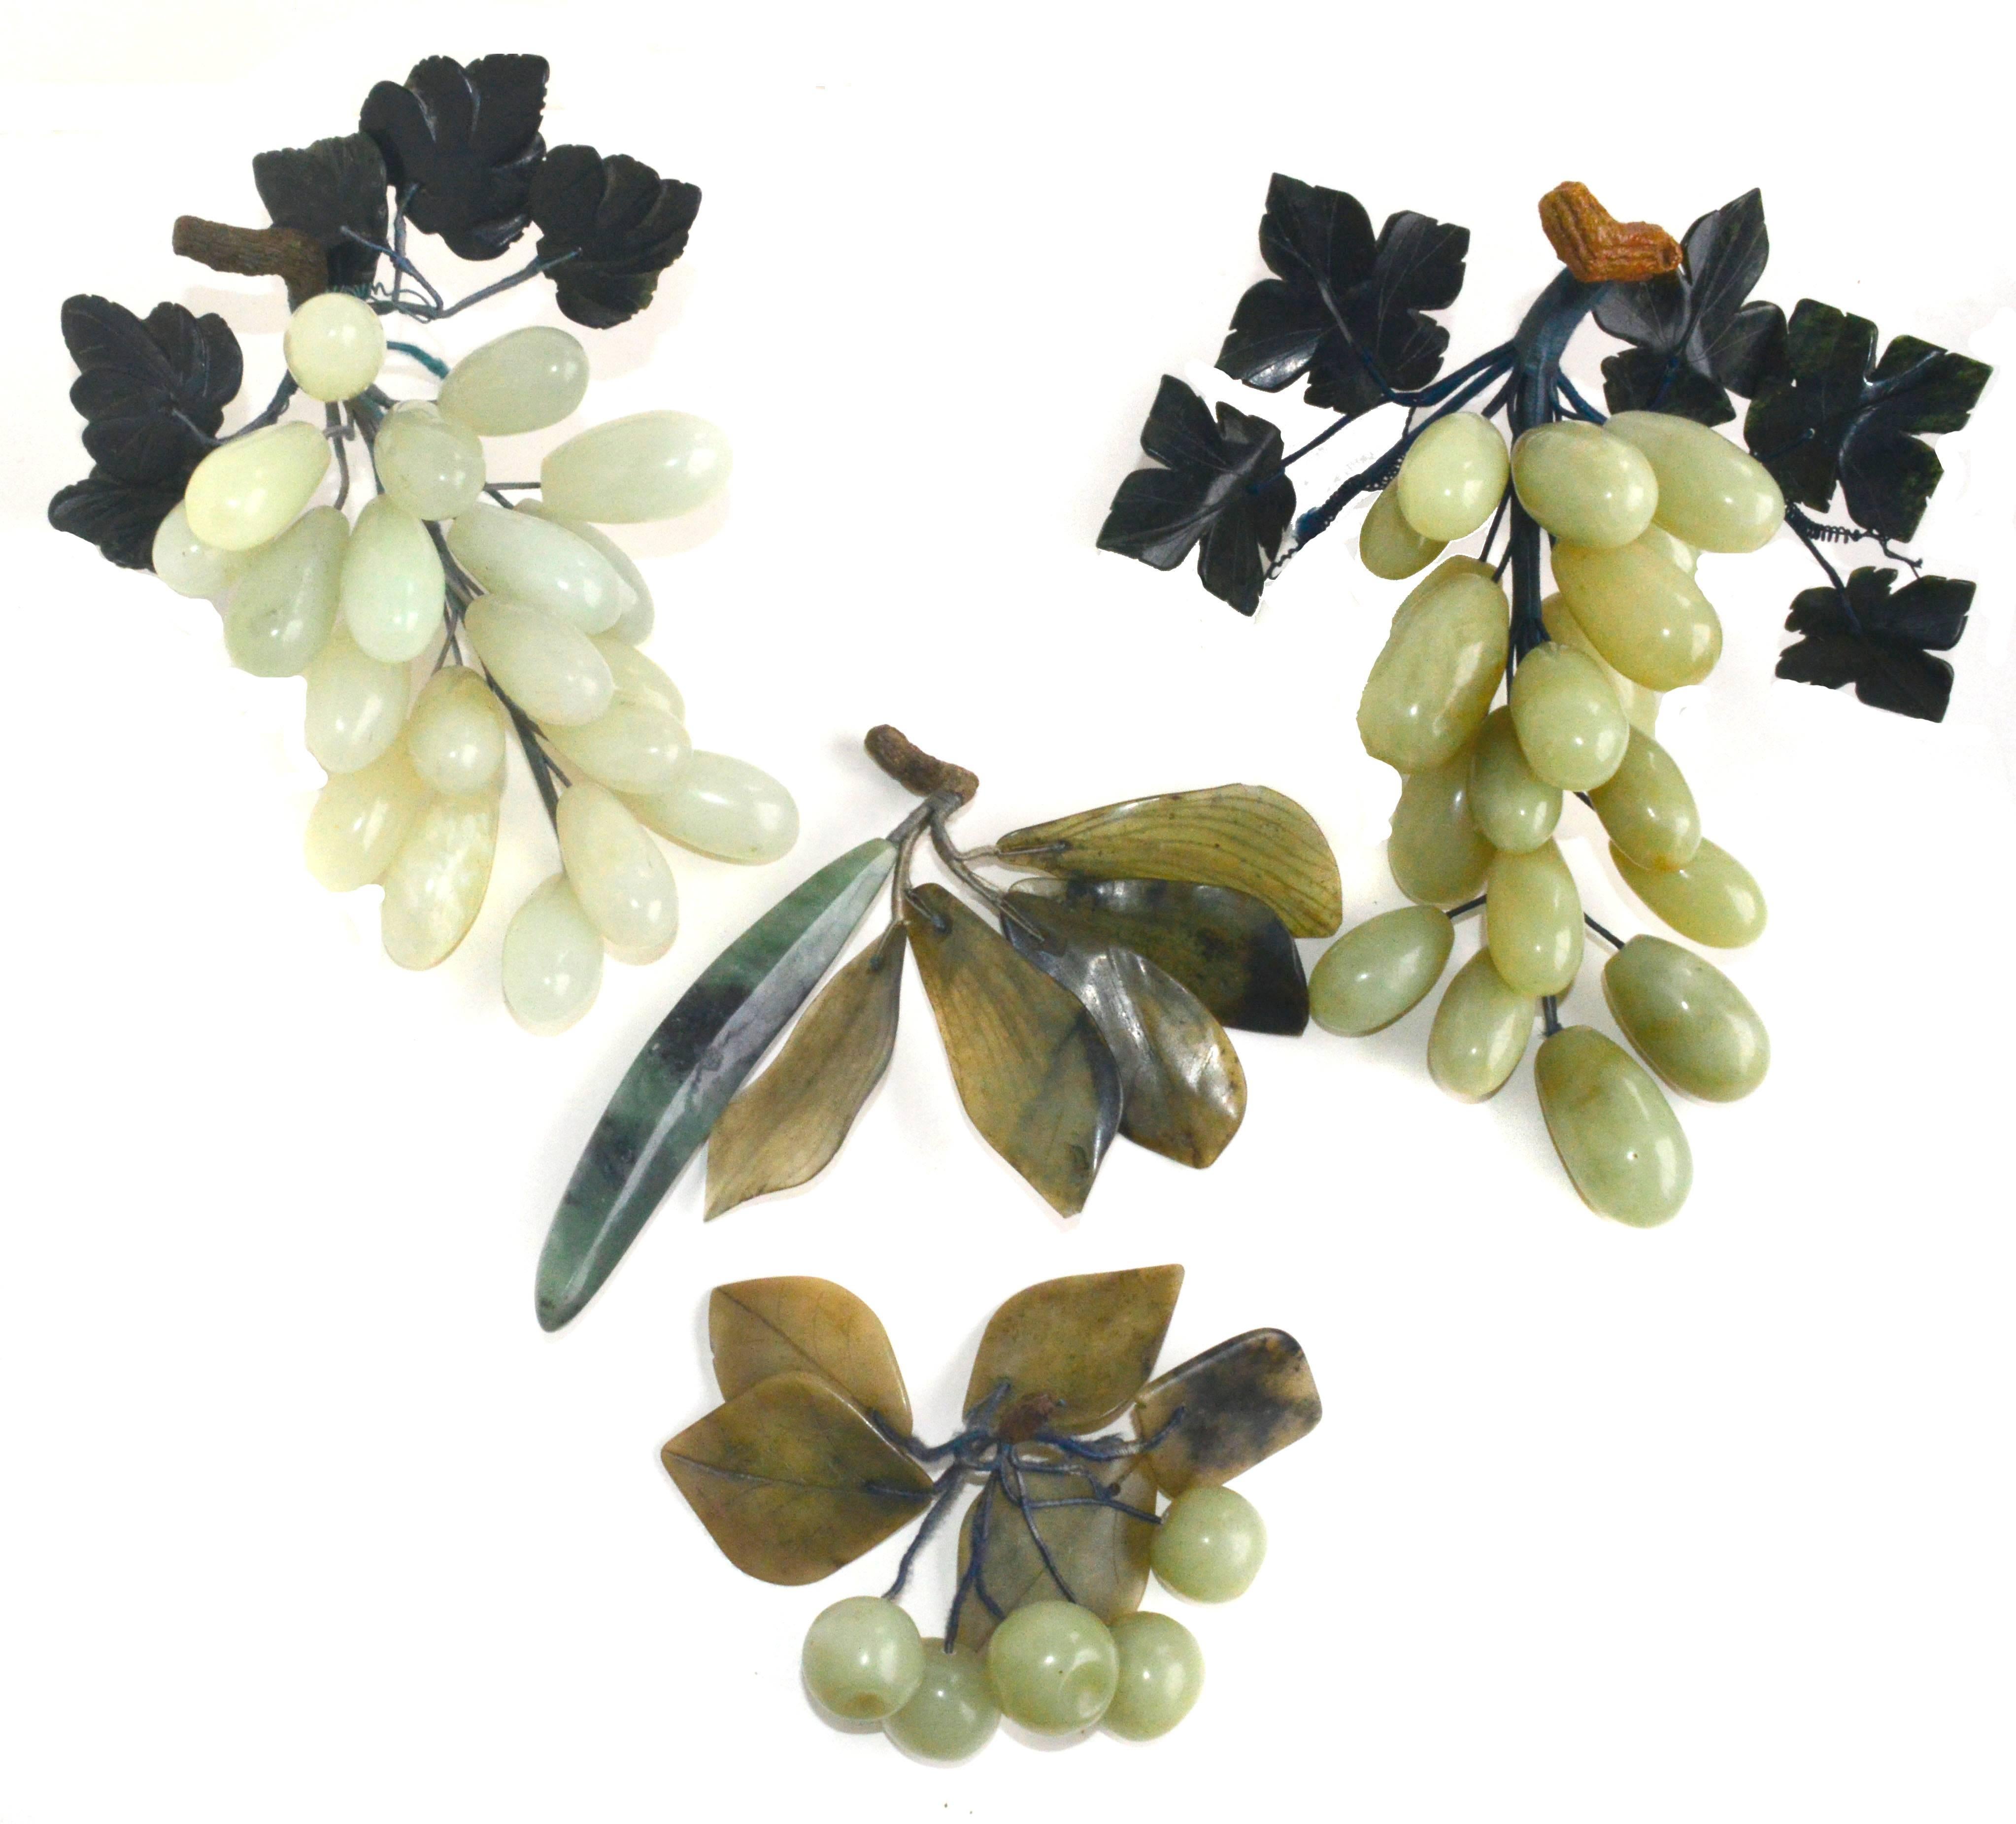 Grouping of three bunches of carved semi-precious, stone grapes: One done in rose quartz, two in jade with jade leaves and wood stems. Vintage, handmade in China. Approximate size of each bunch, 9